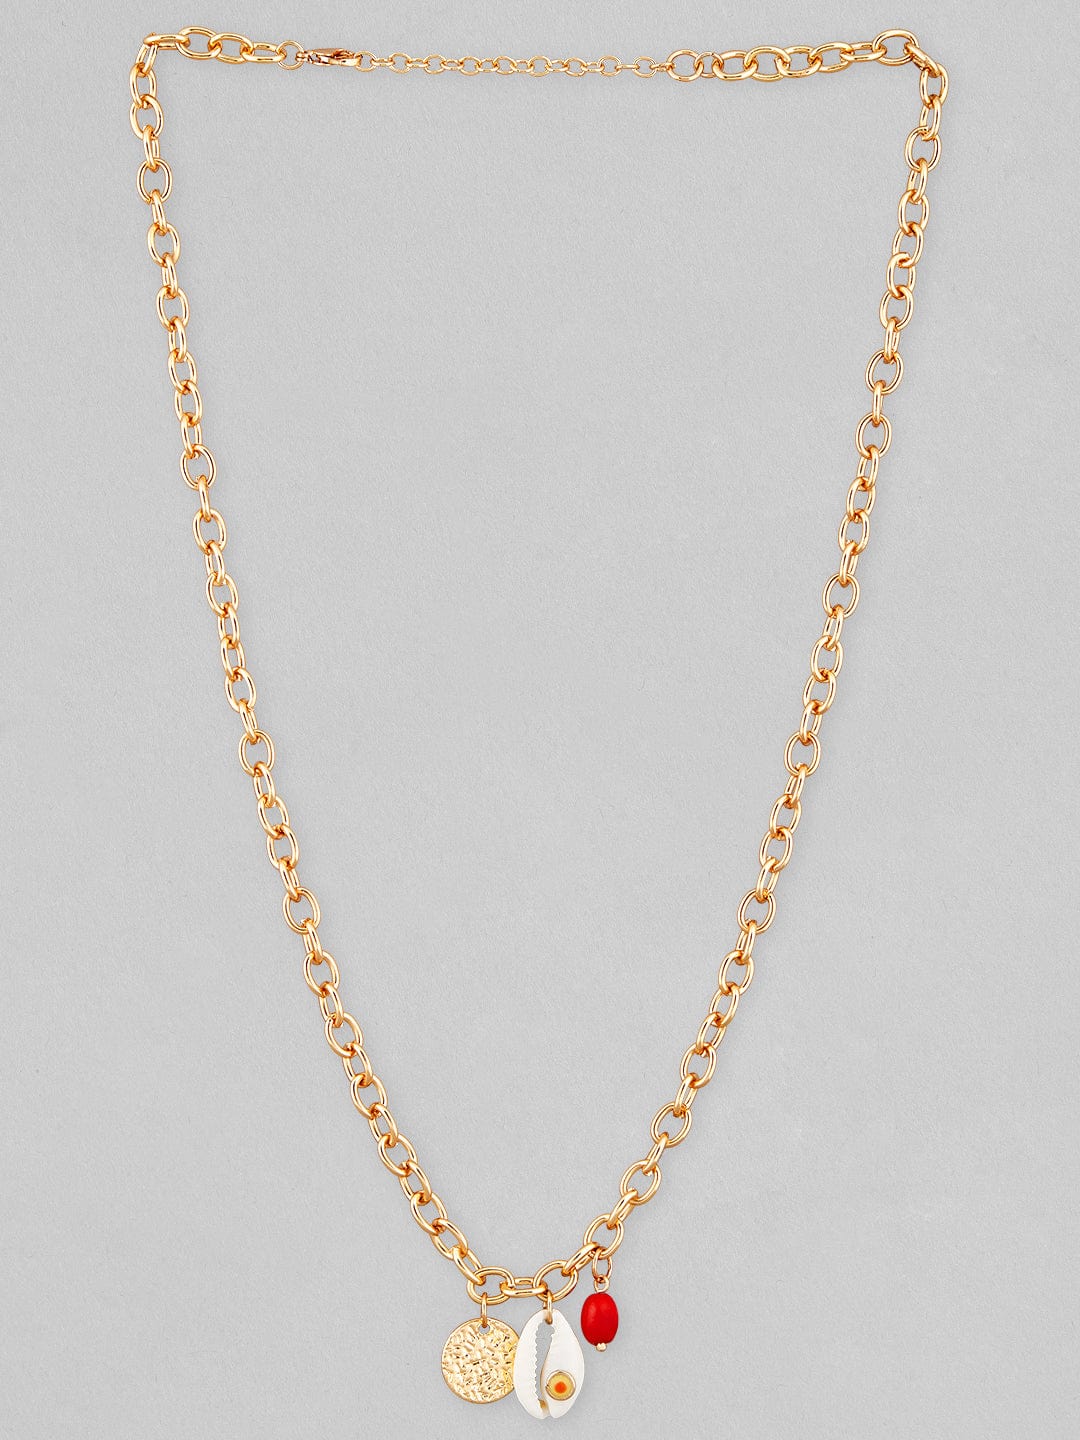 Rubans Voguish Gold-Toned Red Gold-Plated Handcrafted Necklace Chain &amp; Necklaces